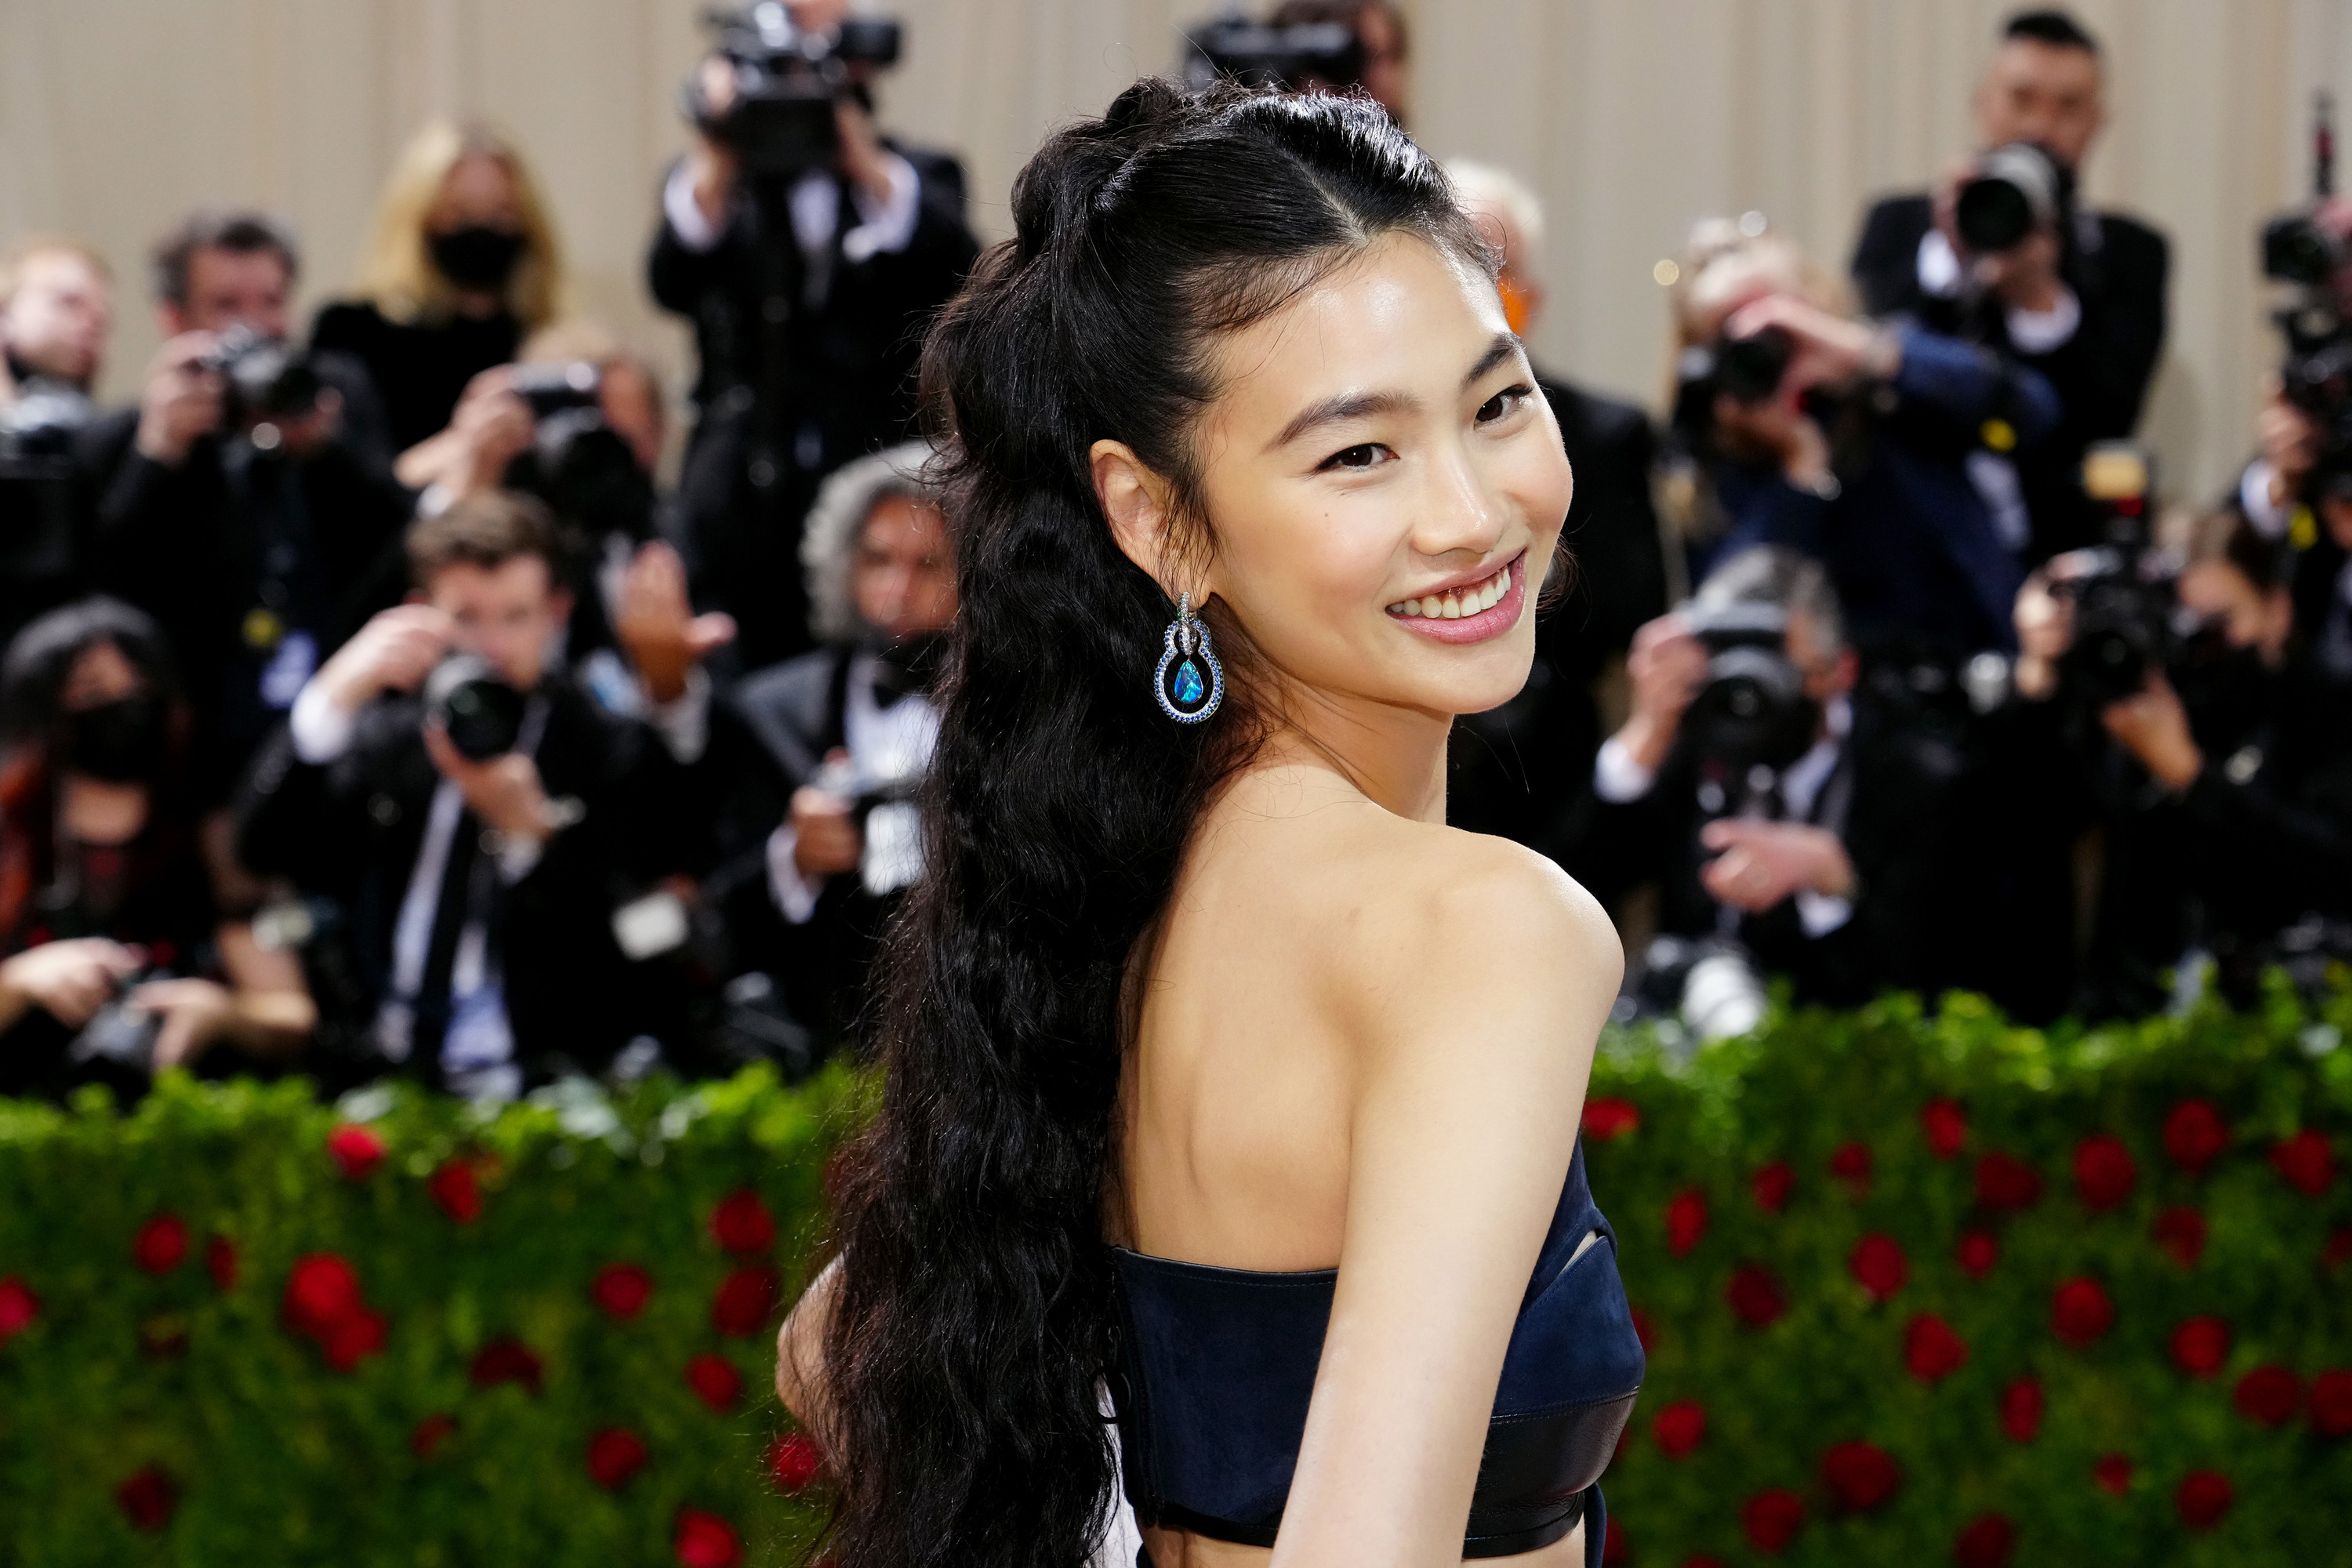 Hoyeon looks back over her shoulder, her long dark hair tied up and falling in glossy waves down her back; she is wearing a navy tube dress with blue and silver drop earrings; she is smiling broadly and has her hands on her hips